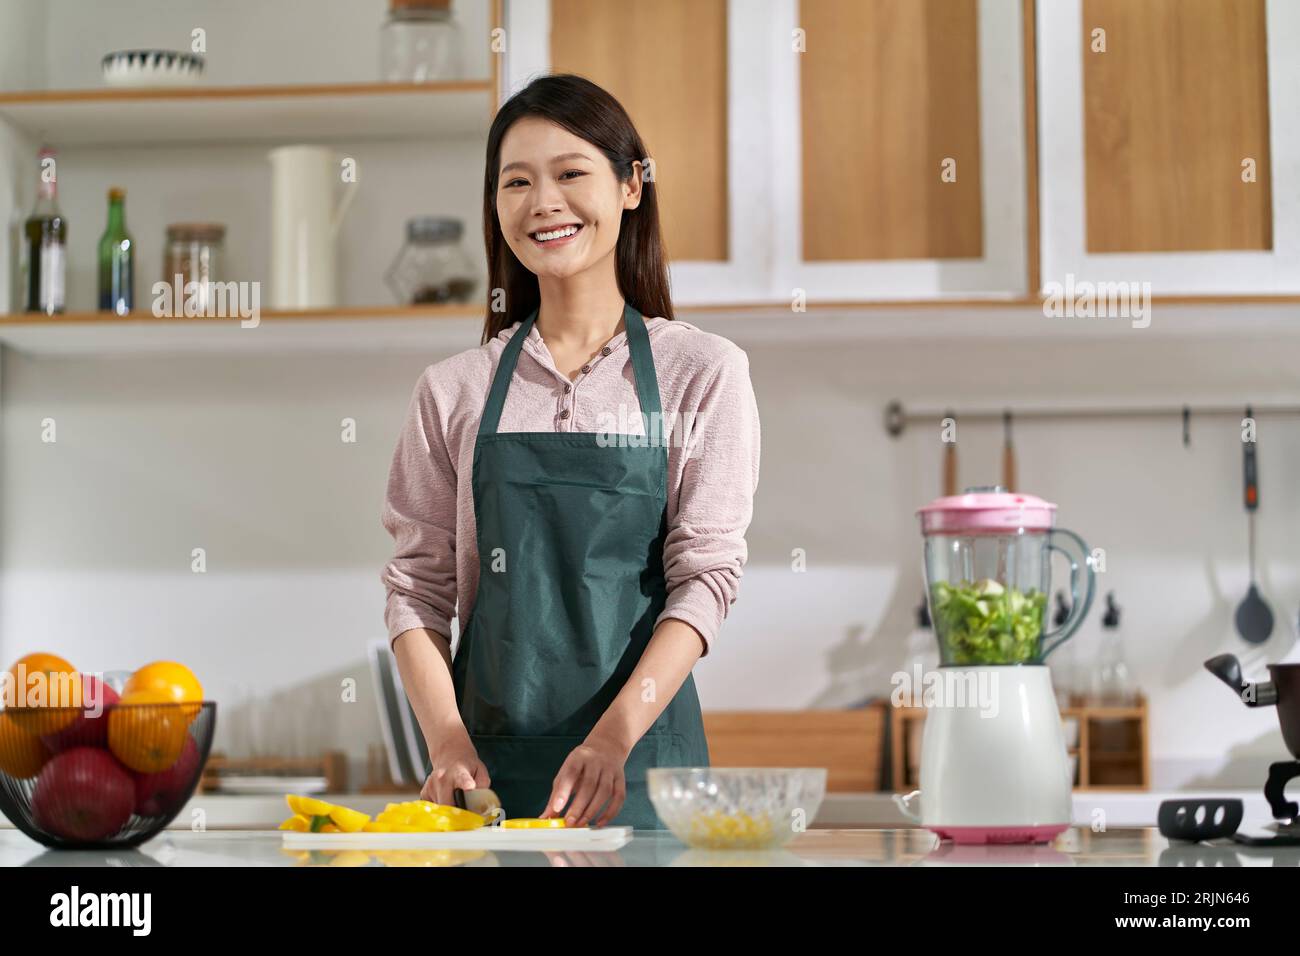 happy young asian woman housewife standing in kitchen looking at camera smiling Stock Photo